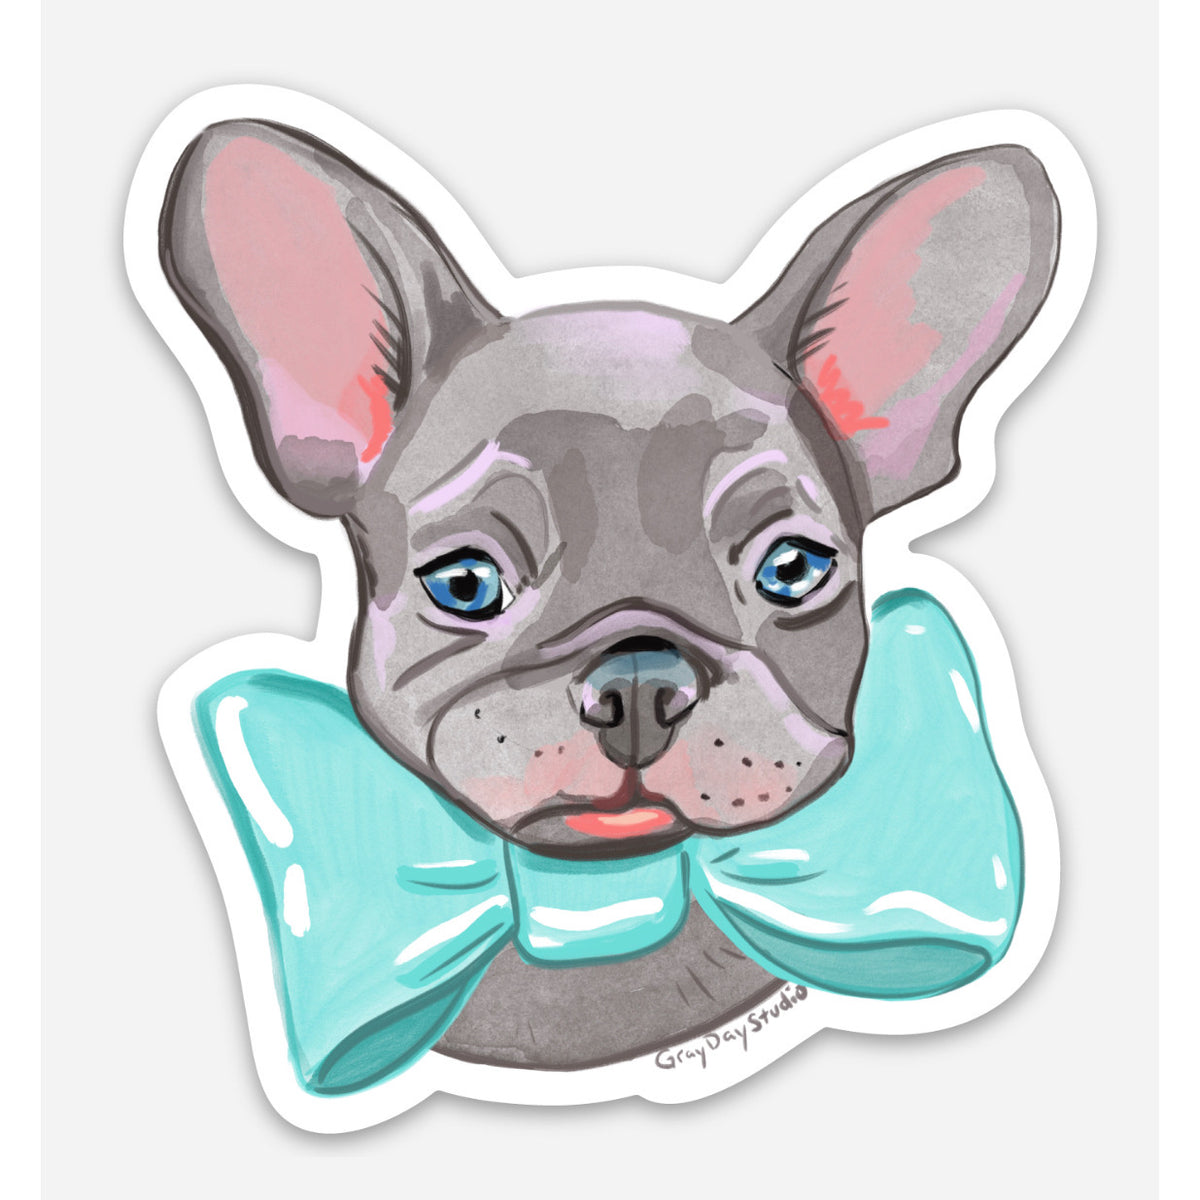 frenchie illustrated cute puppy sticker by Abigail Gray Swartz of Gray day studio